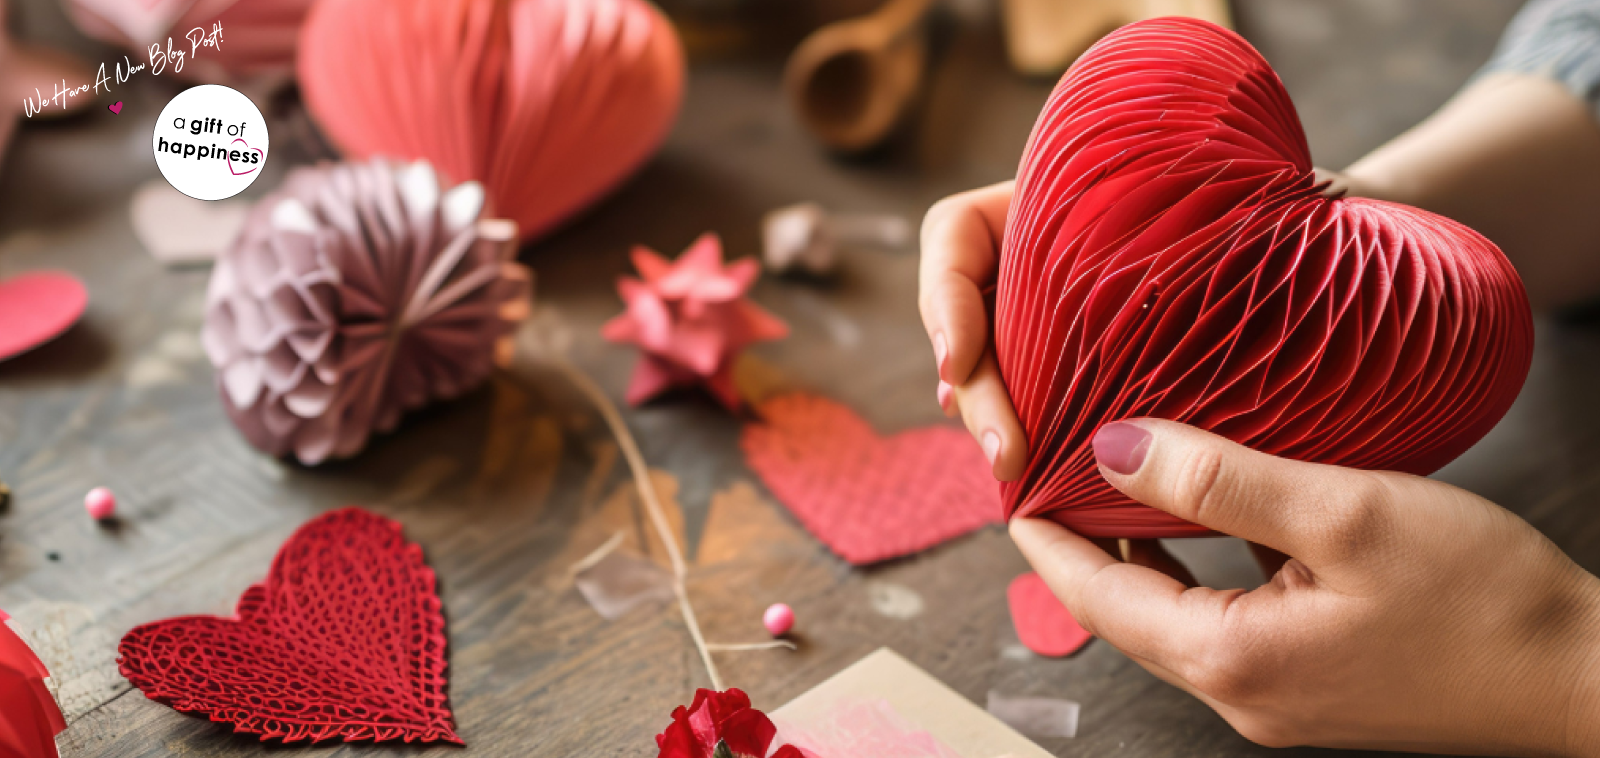 This Valentine's Day, A Gift of Happiness lists the top 8 DIY Gift ideas that would be perfect for your Valentine.